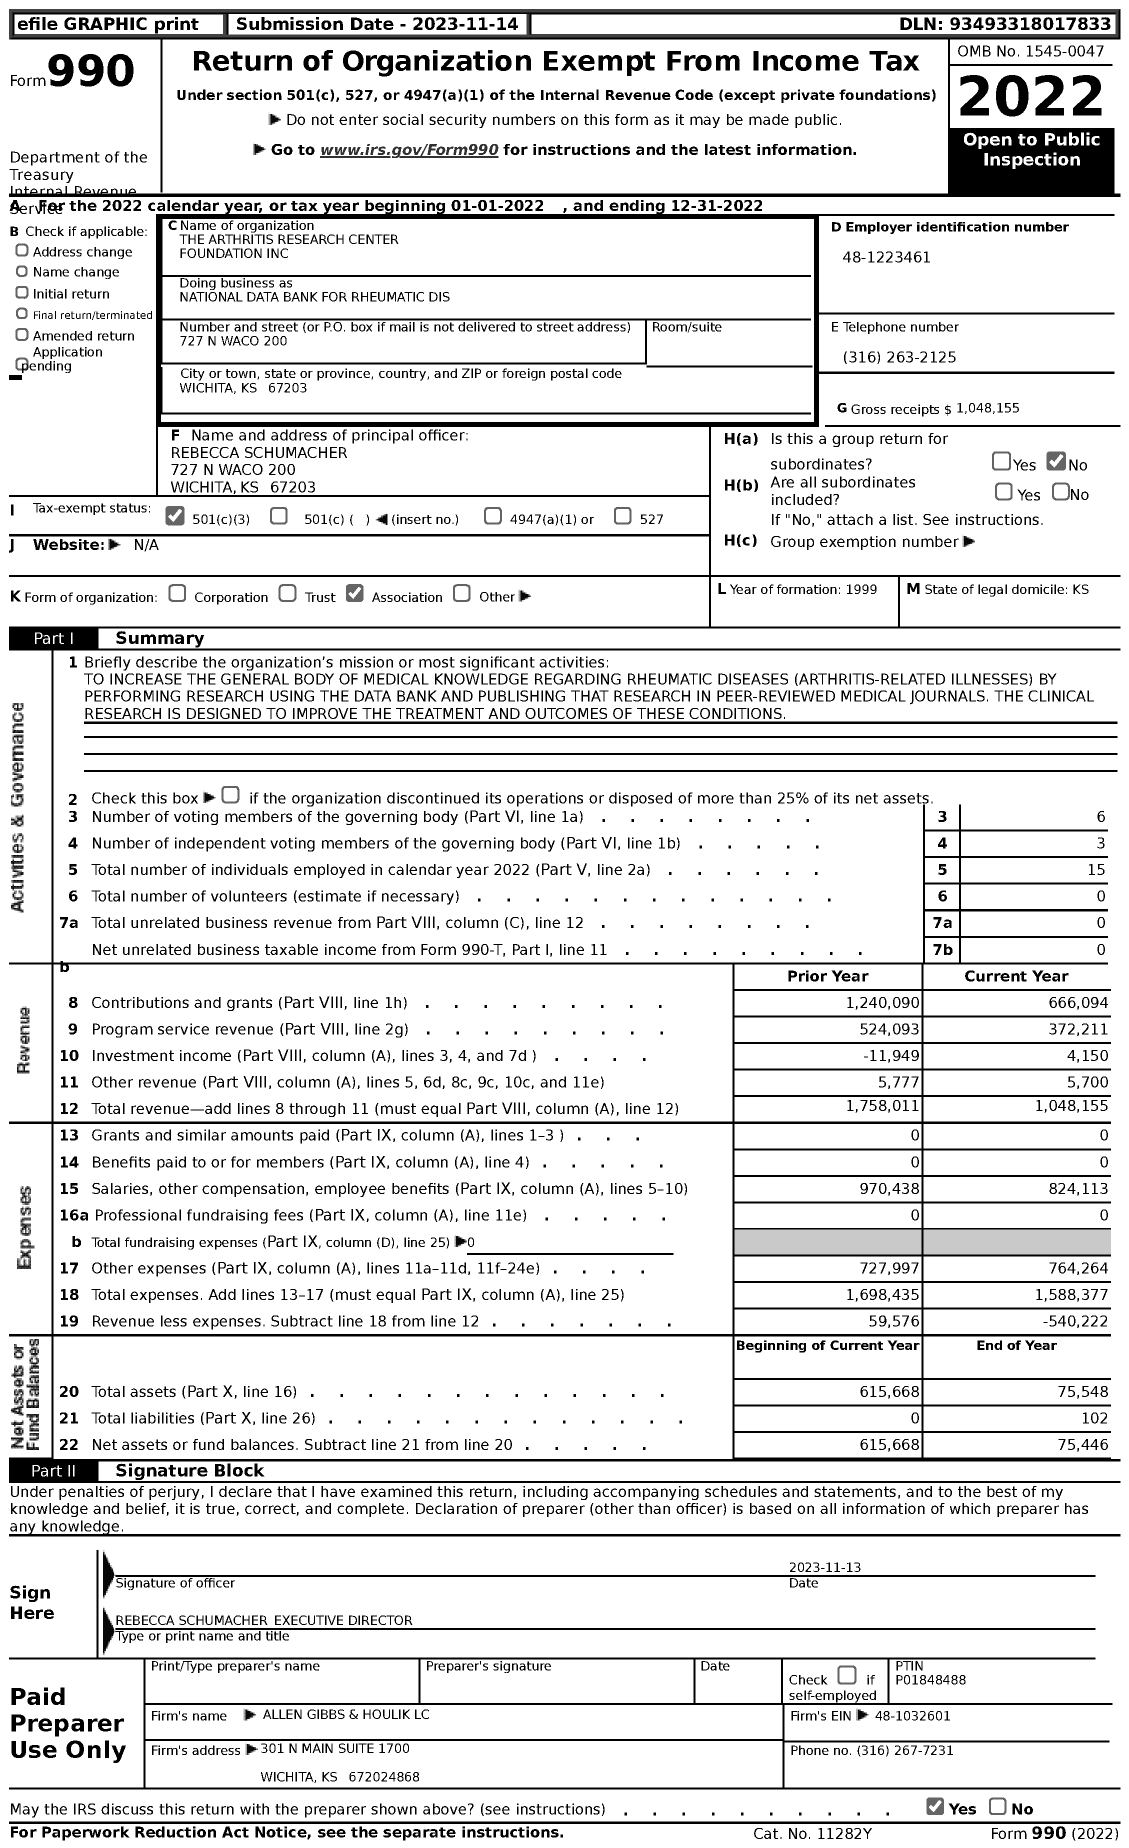 Image of first page of 2022 Form 990 for National Data Bank for Rheumatic Dis